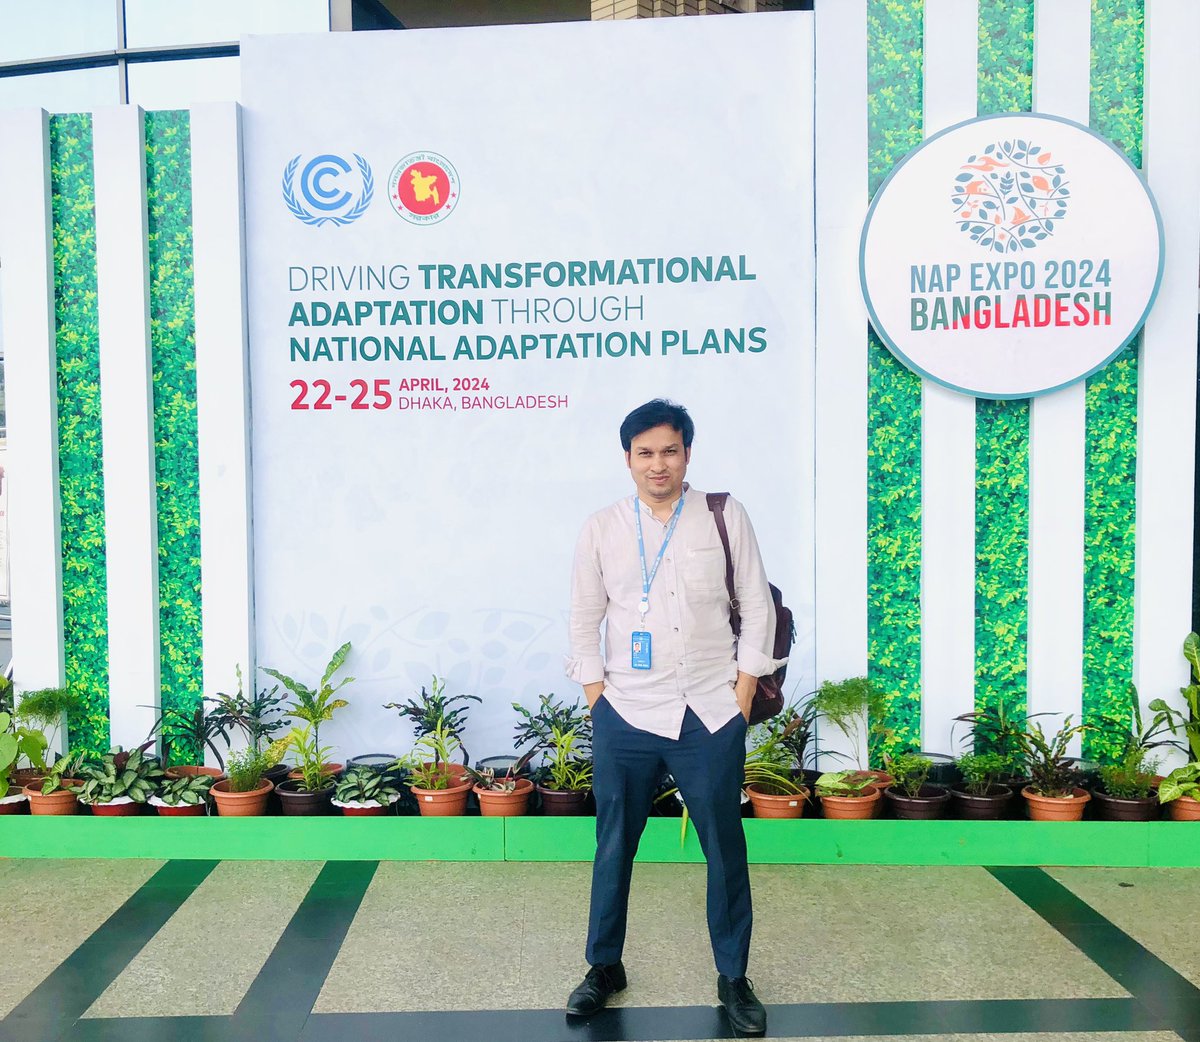 #NAPExpo 2024 is underway in Bangladesh from 22-25 April. 

NAP Expo aims to raise adaptation ambition by advancing the formulation and implementation of the National Adaptation Plans (NAPs).